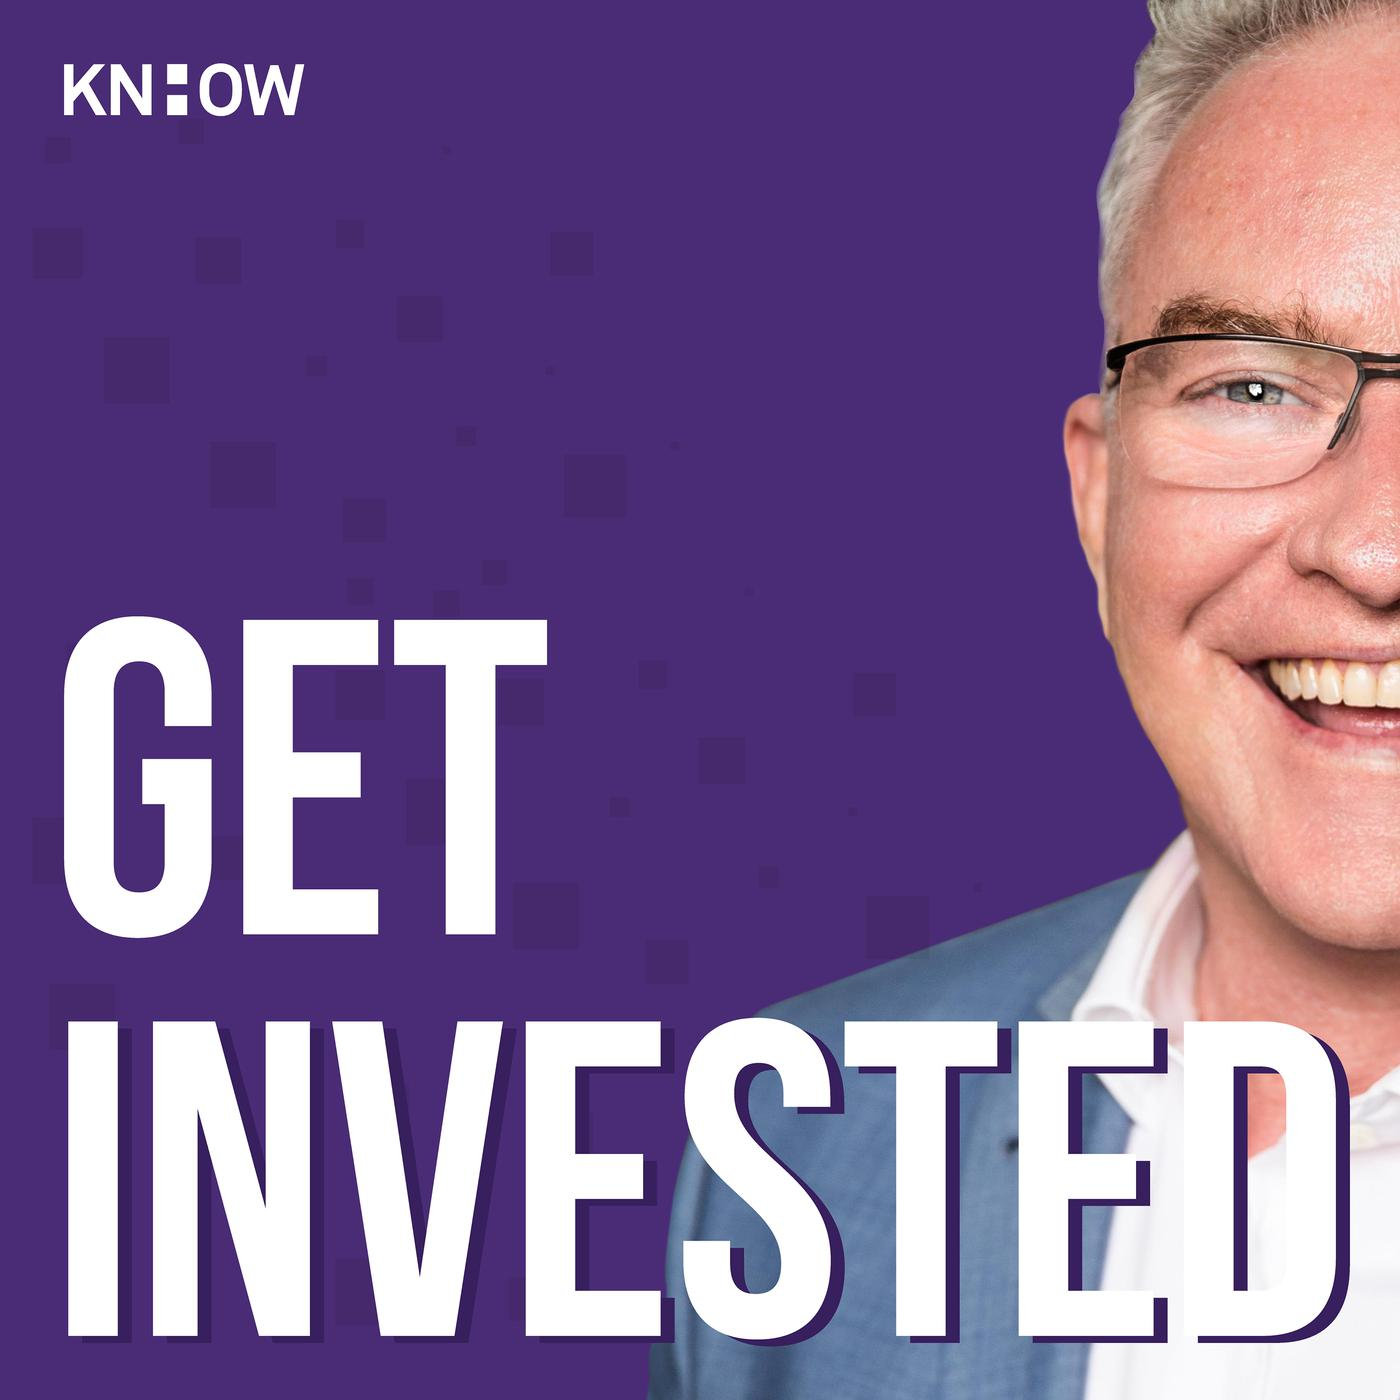 Get Invested: Bushy Martin on how to actually achieve your goals